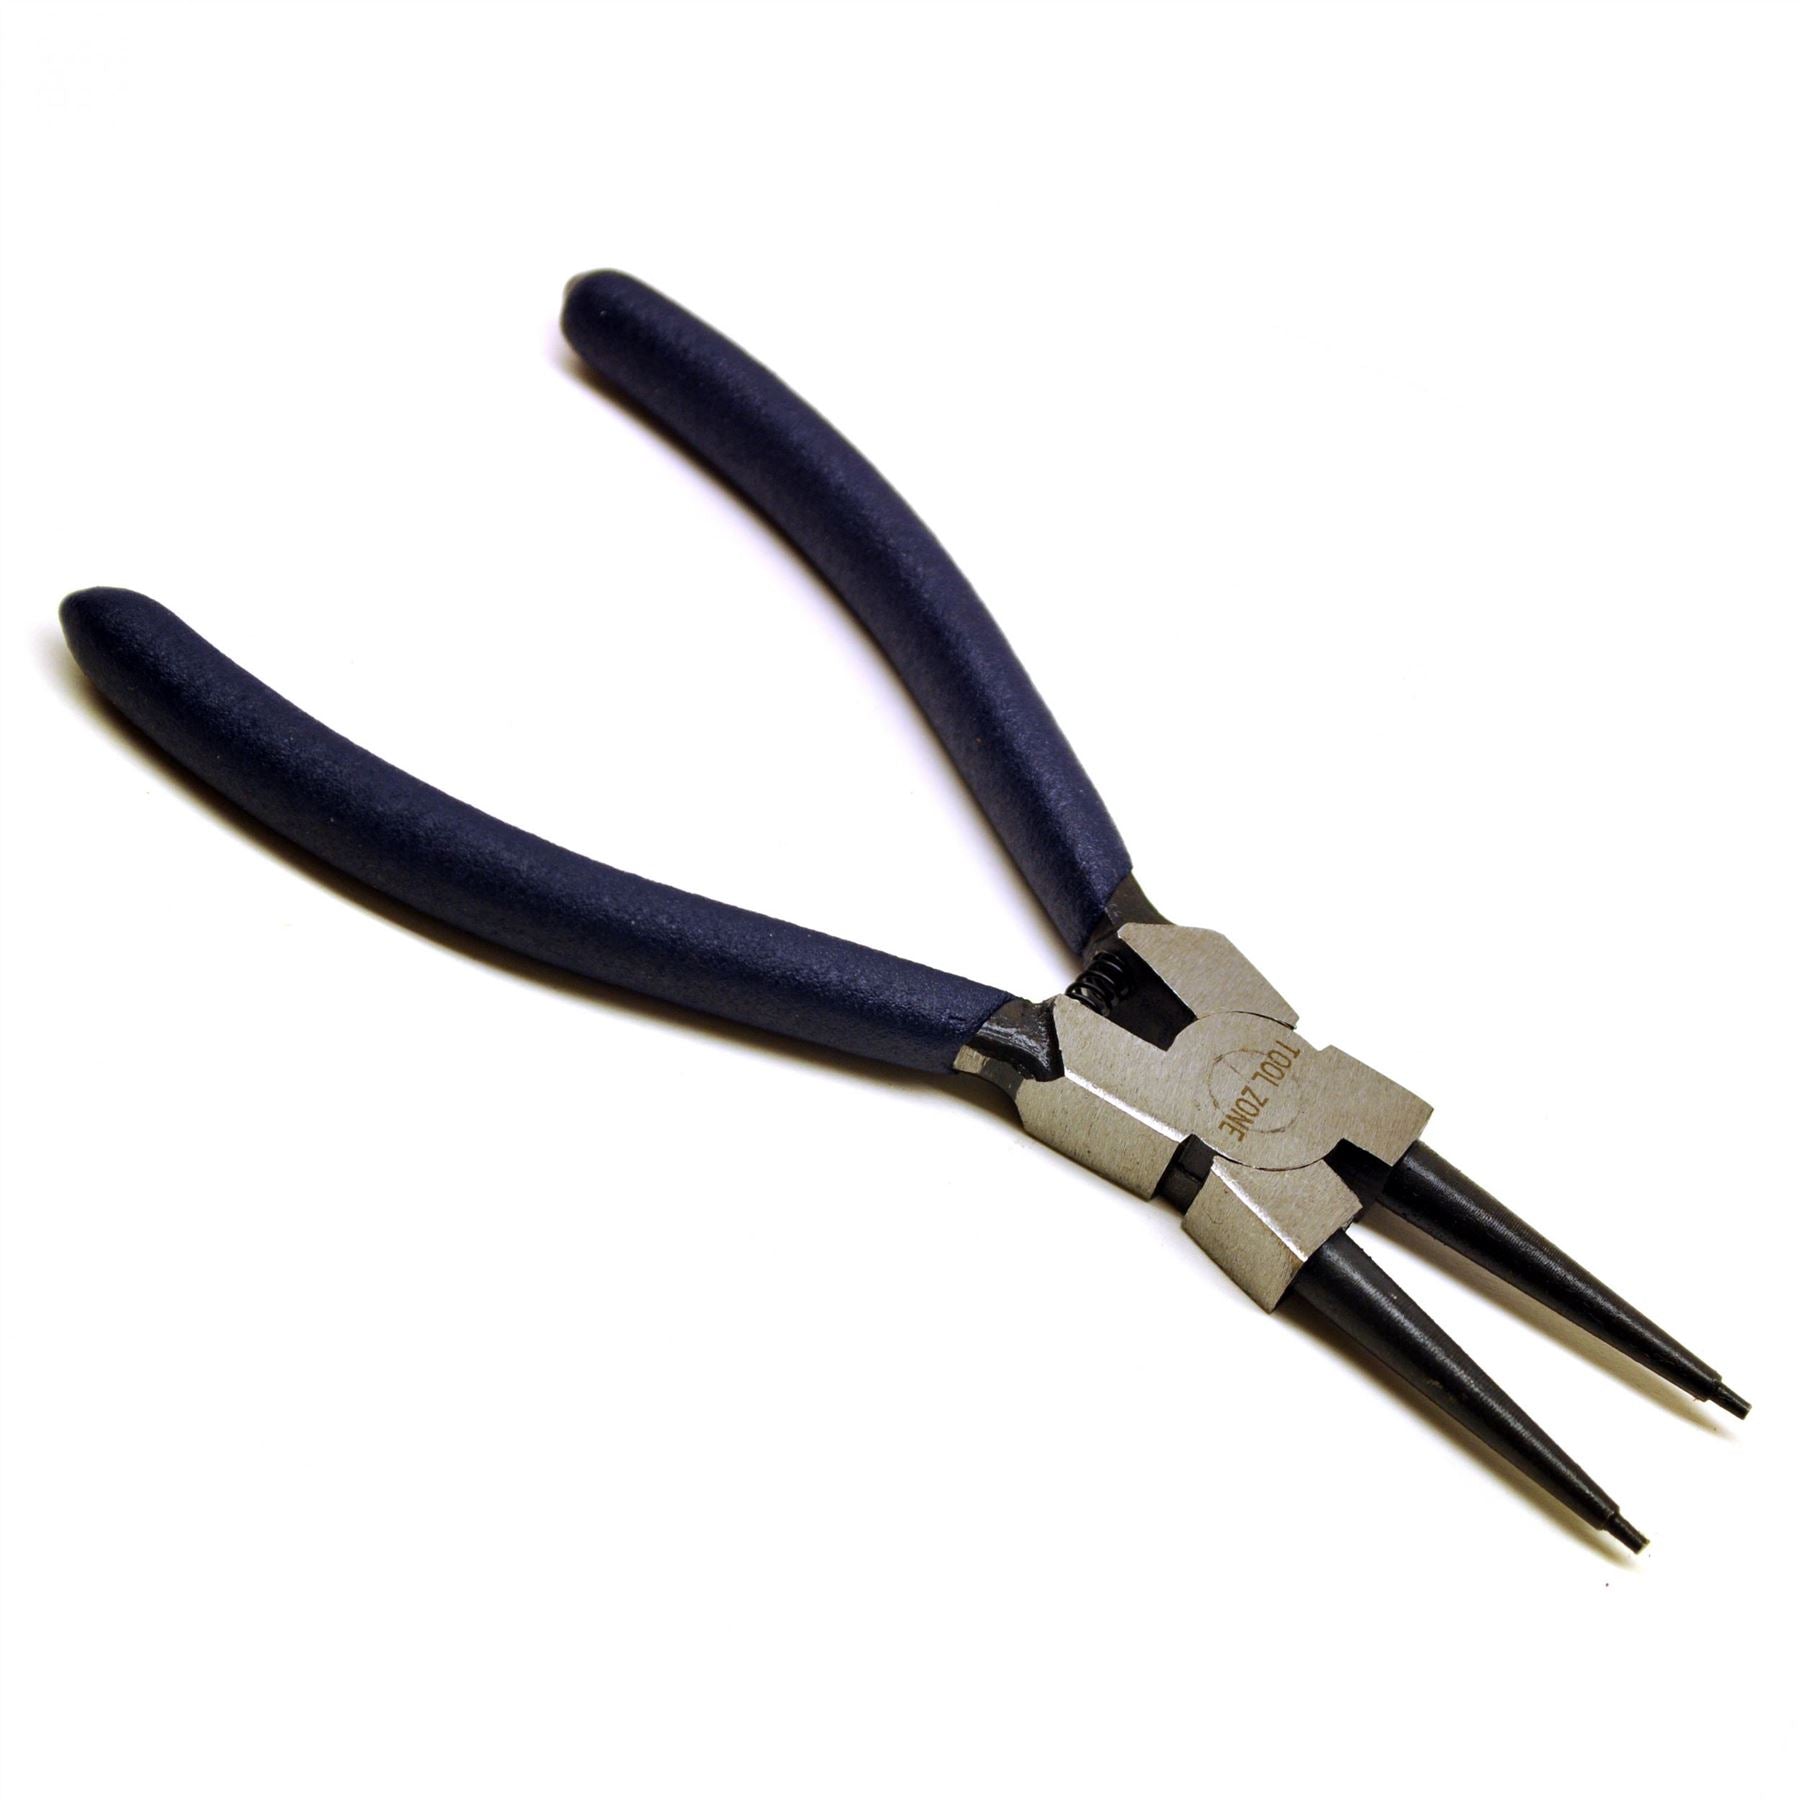 Individual Circlip Plier Internal Straight 6" / 150mm with dipped handles TE491